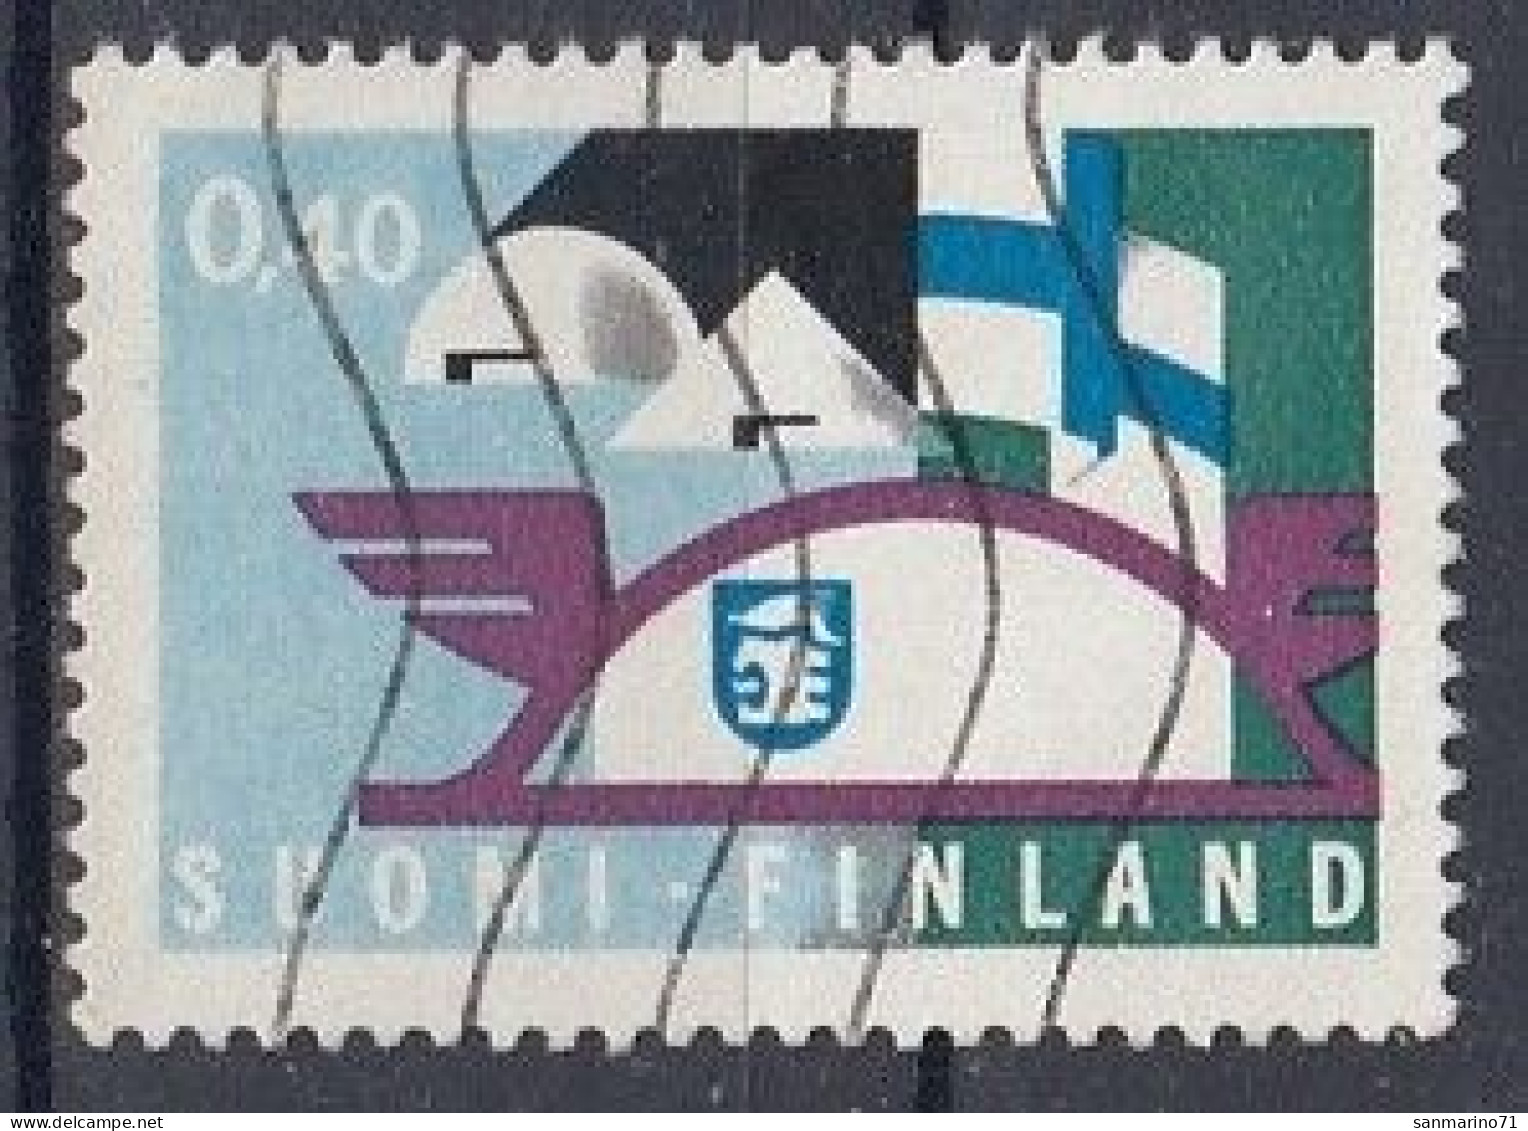 FINLAND 662,used,falc Hinged - Used Stamps